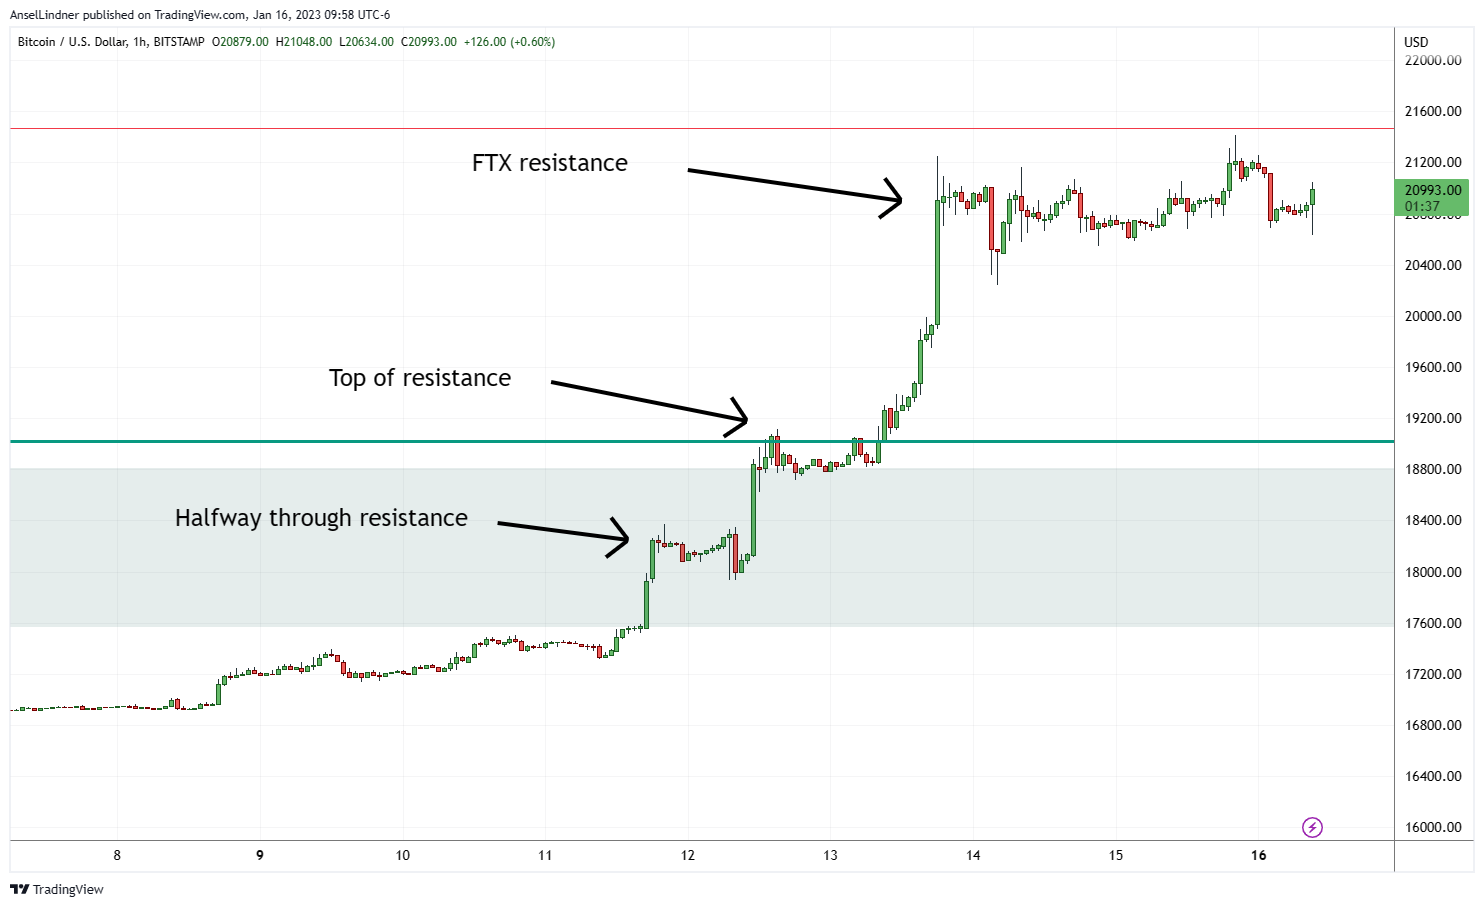 Bitcoin hourly chart with resistance zones